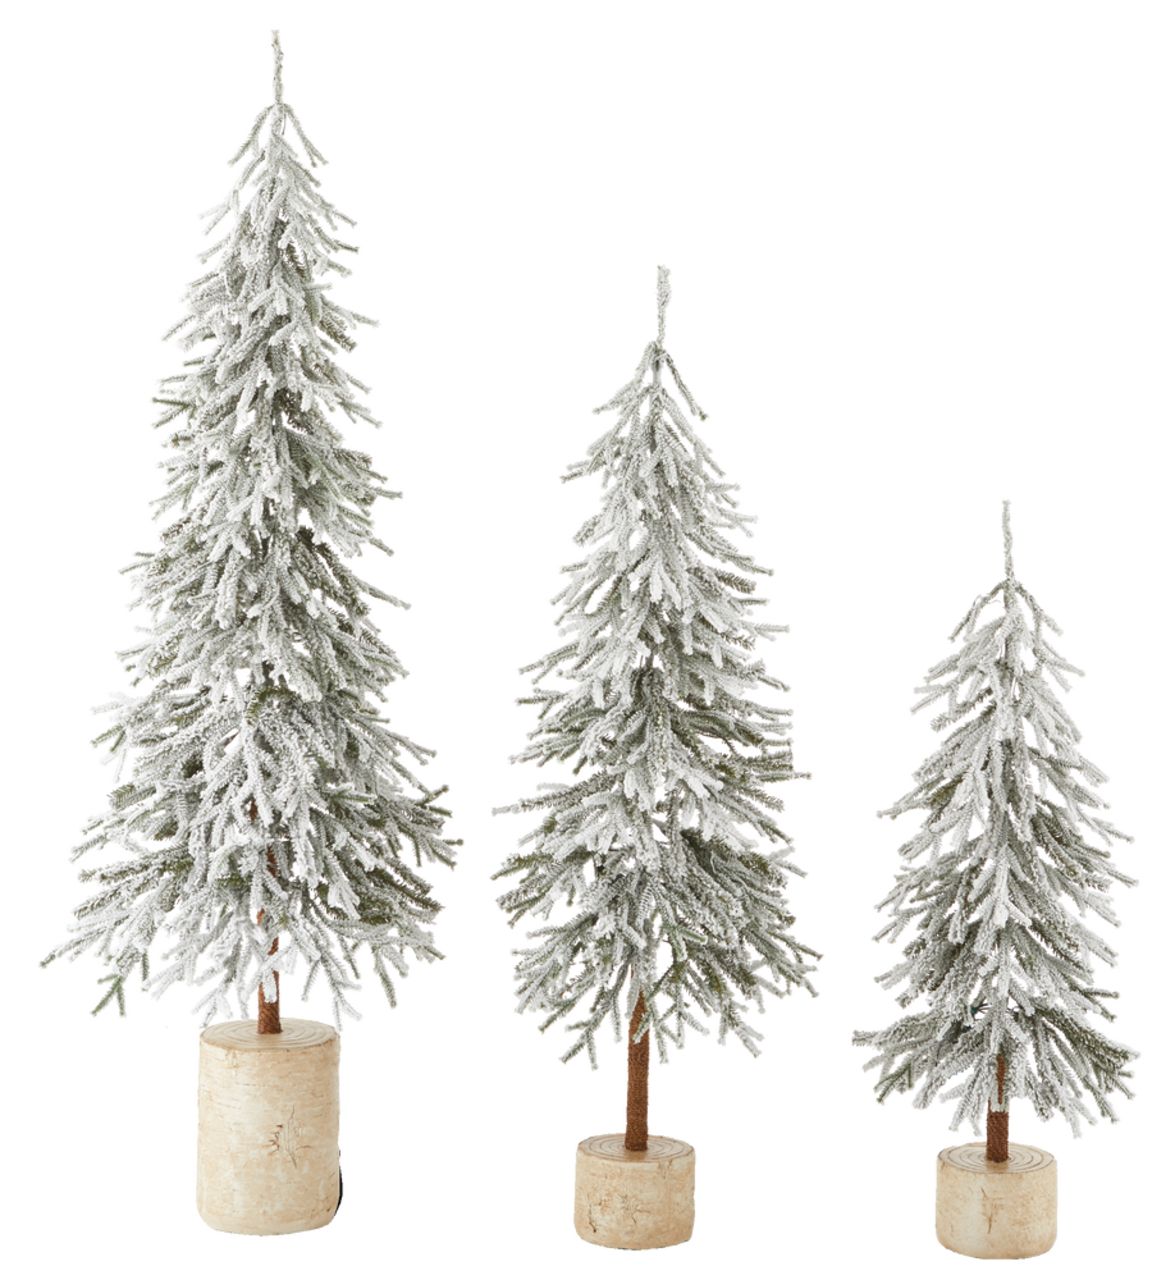 CANVAS Flocked Downswept Pre-Lit Potted Trees, 3-pk#051-4805-0 | Canadian Tire